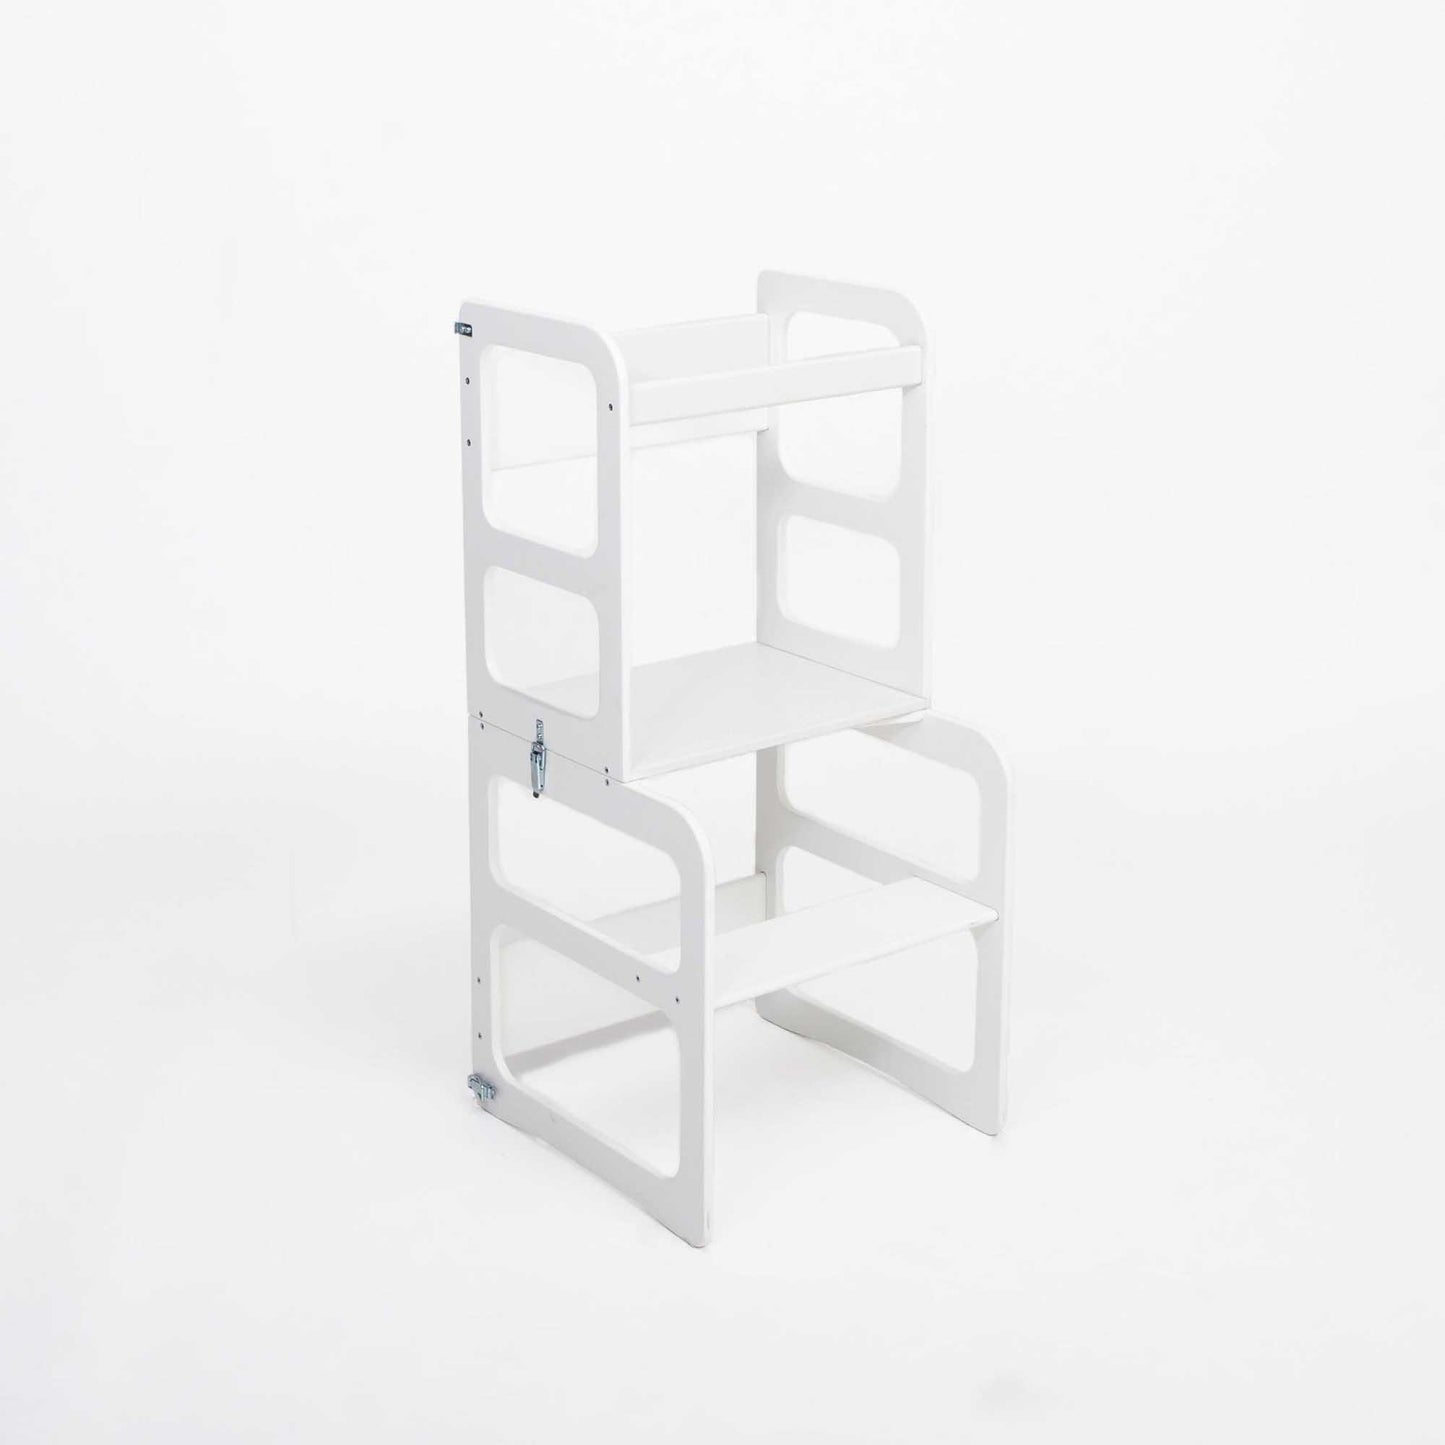 A 2-in-1 transformable kitchen step stool- table and chair set on a white background.